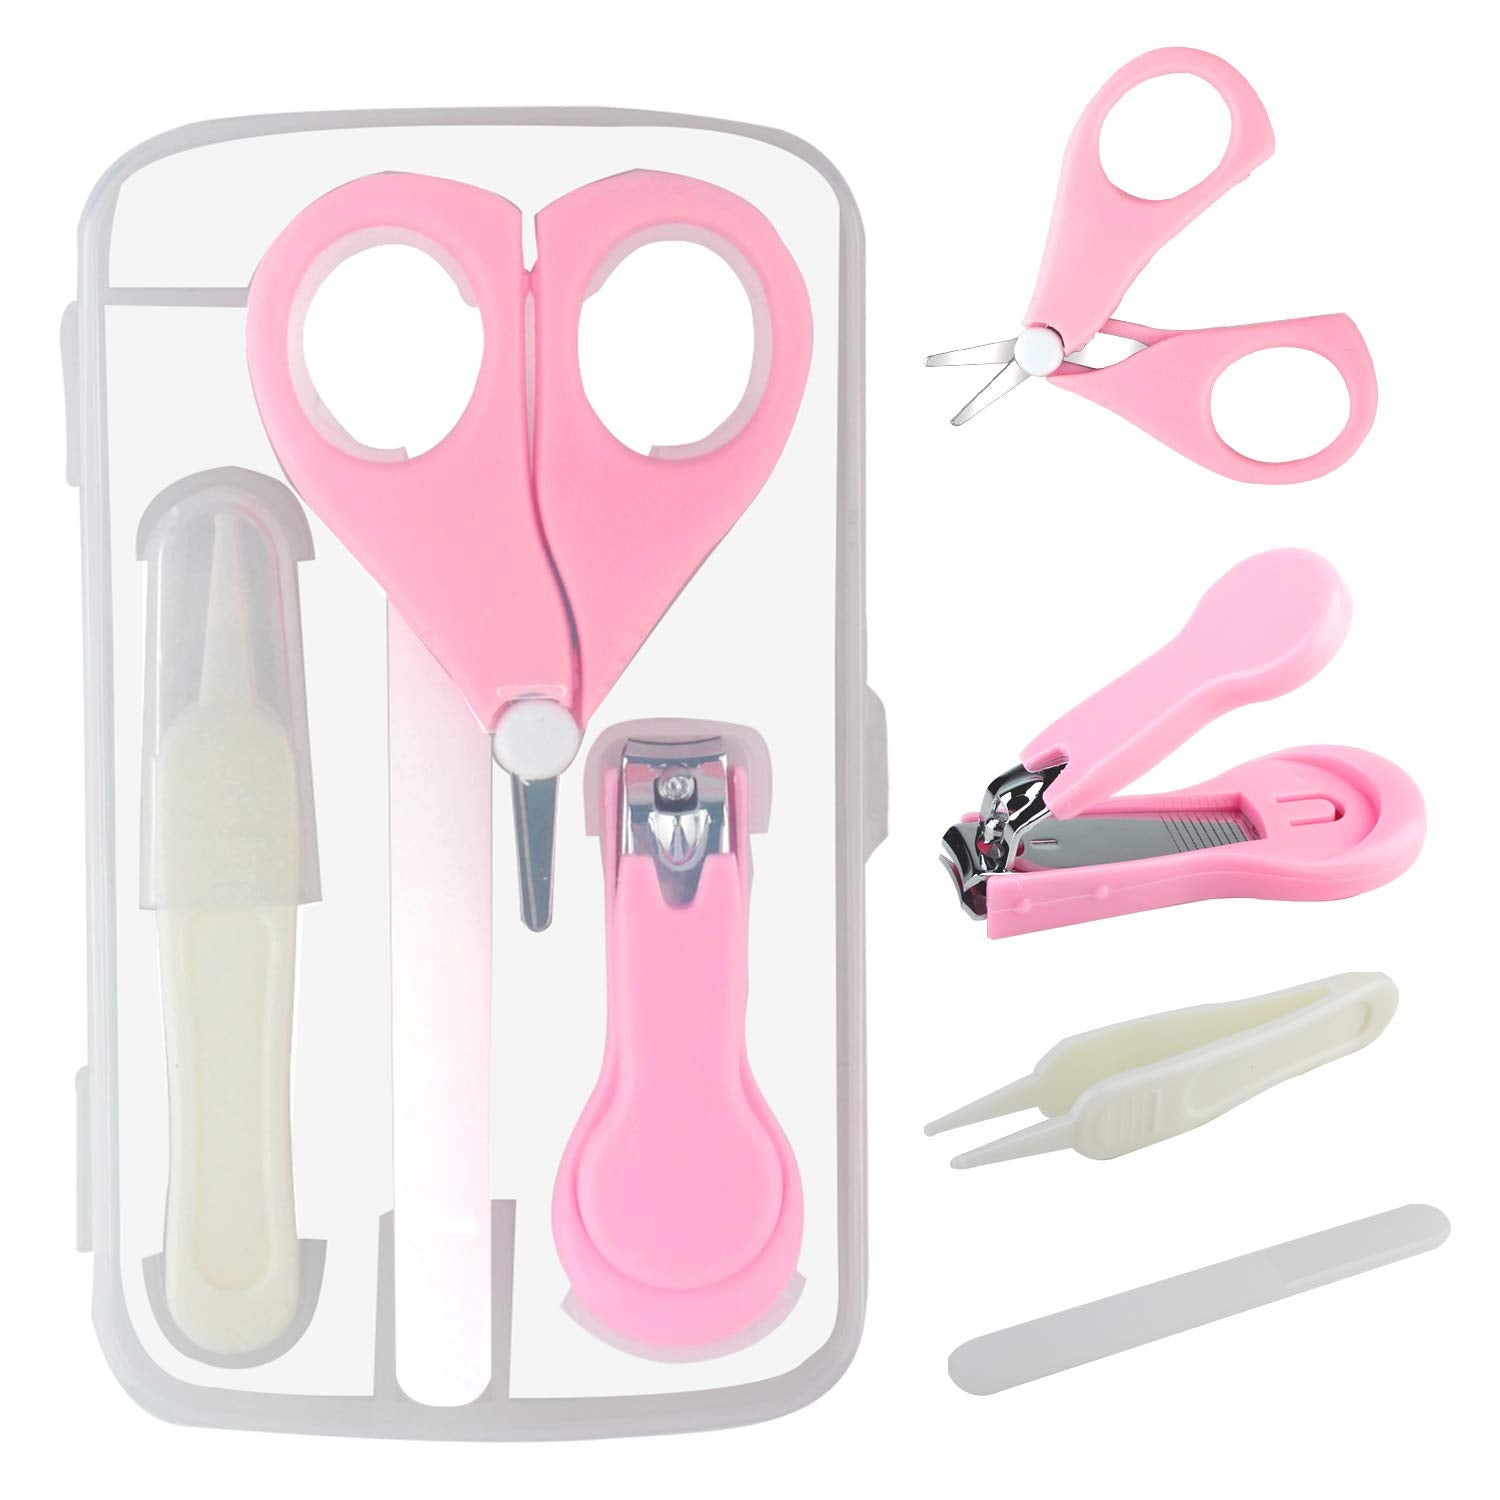 Baby Moo  4 in 1 Grooming Manicure Pedicure Nail Clipper Set - Pink